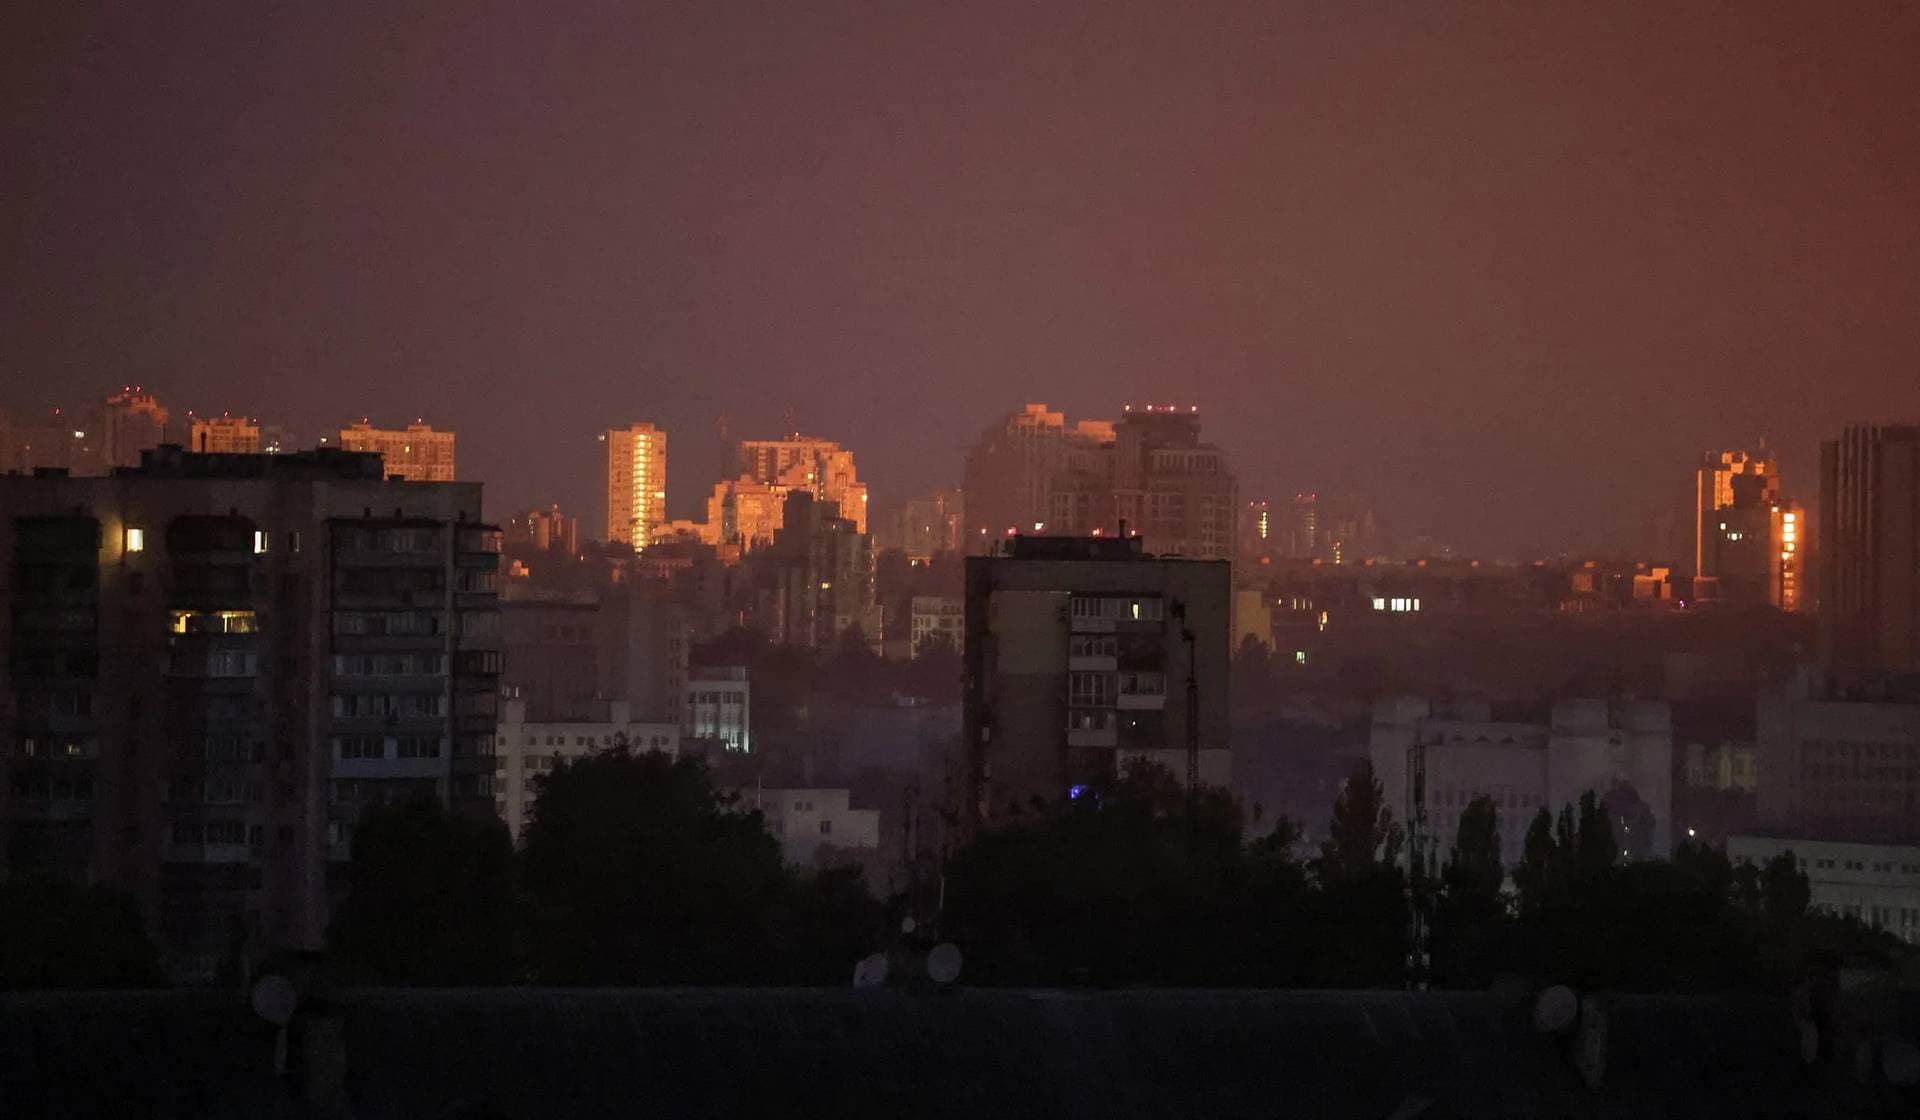 A flash from the explosion of a missile illuminates the city during a Russian missile strike in Kyiv